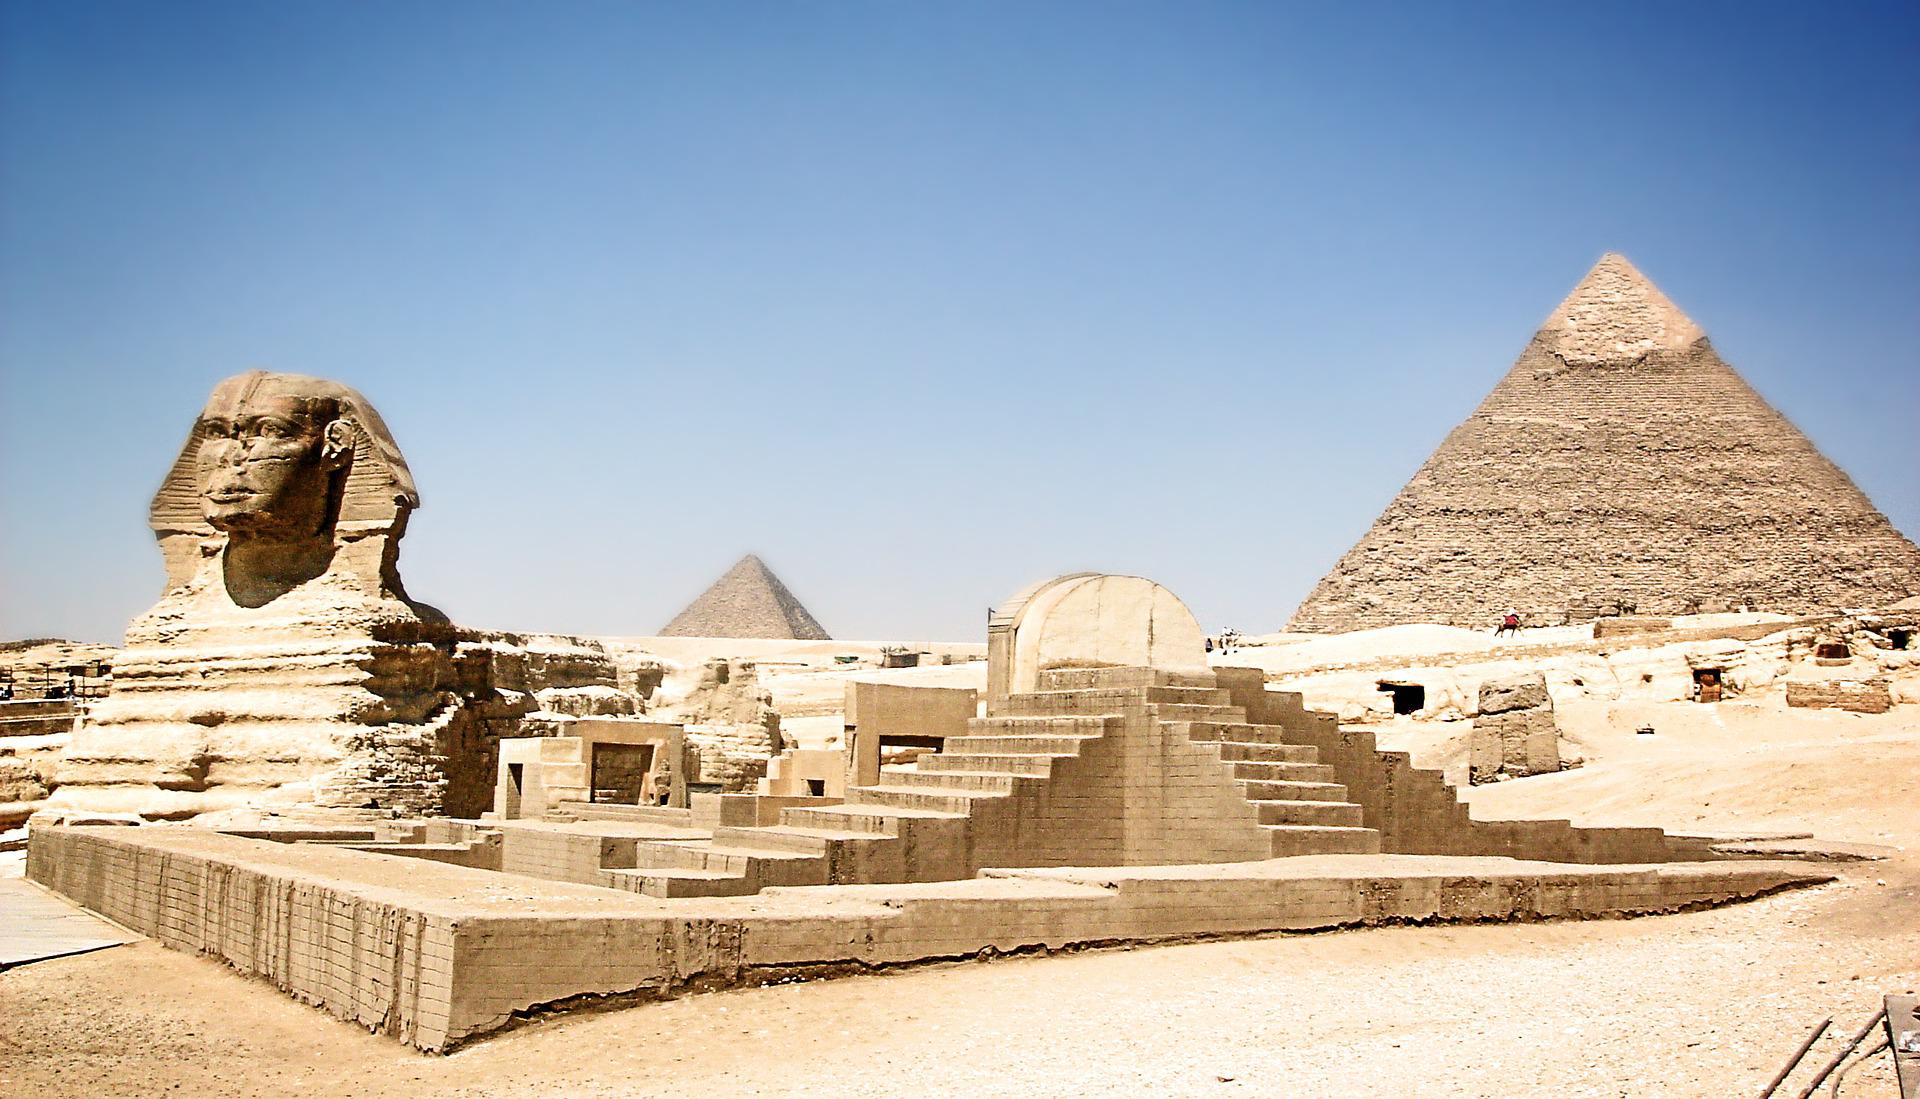 Iconic buildings – the pyramids